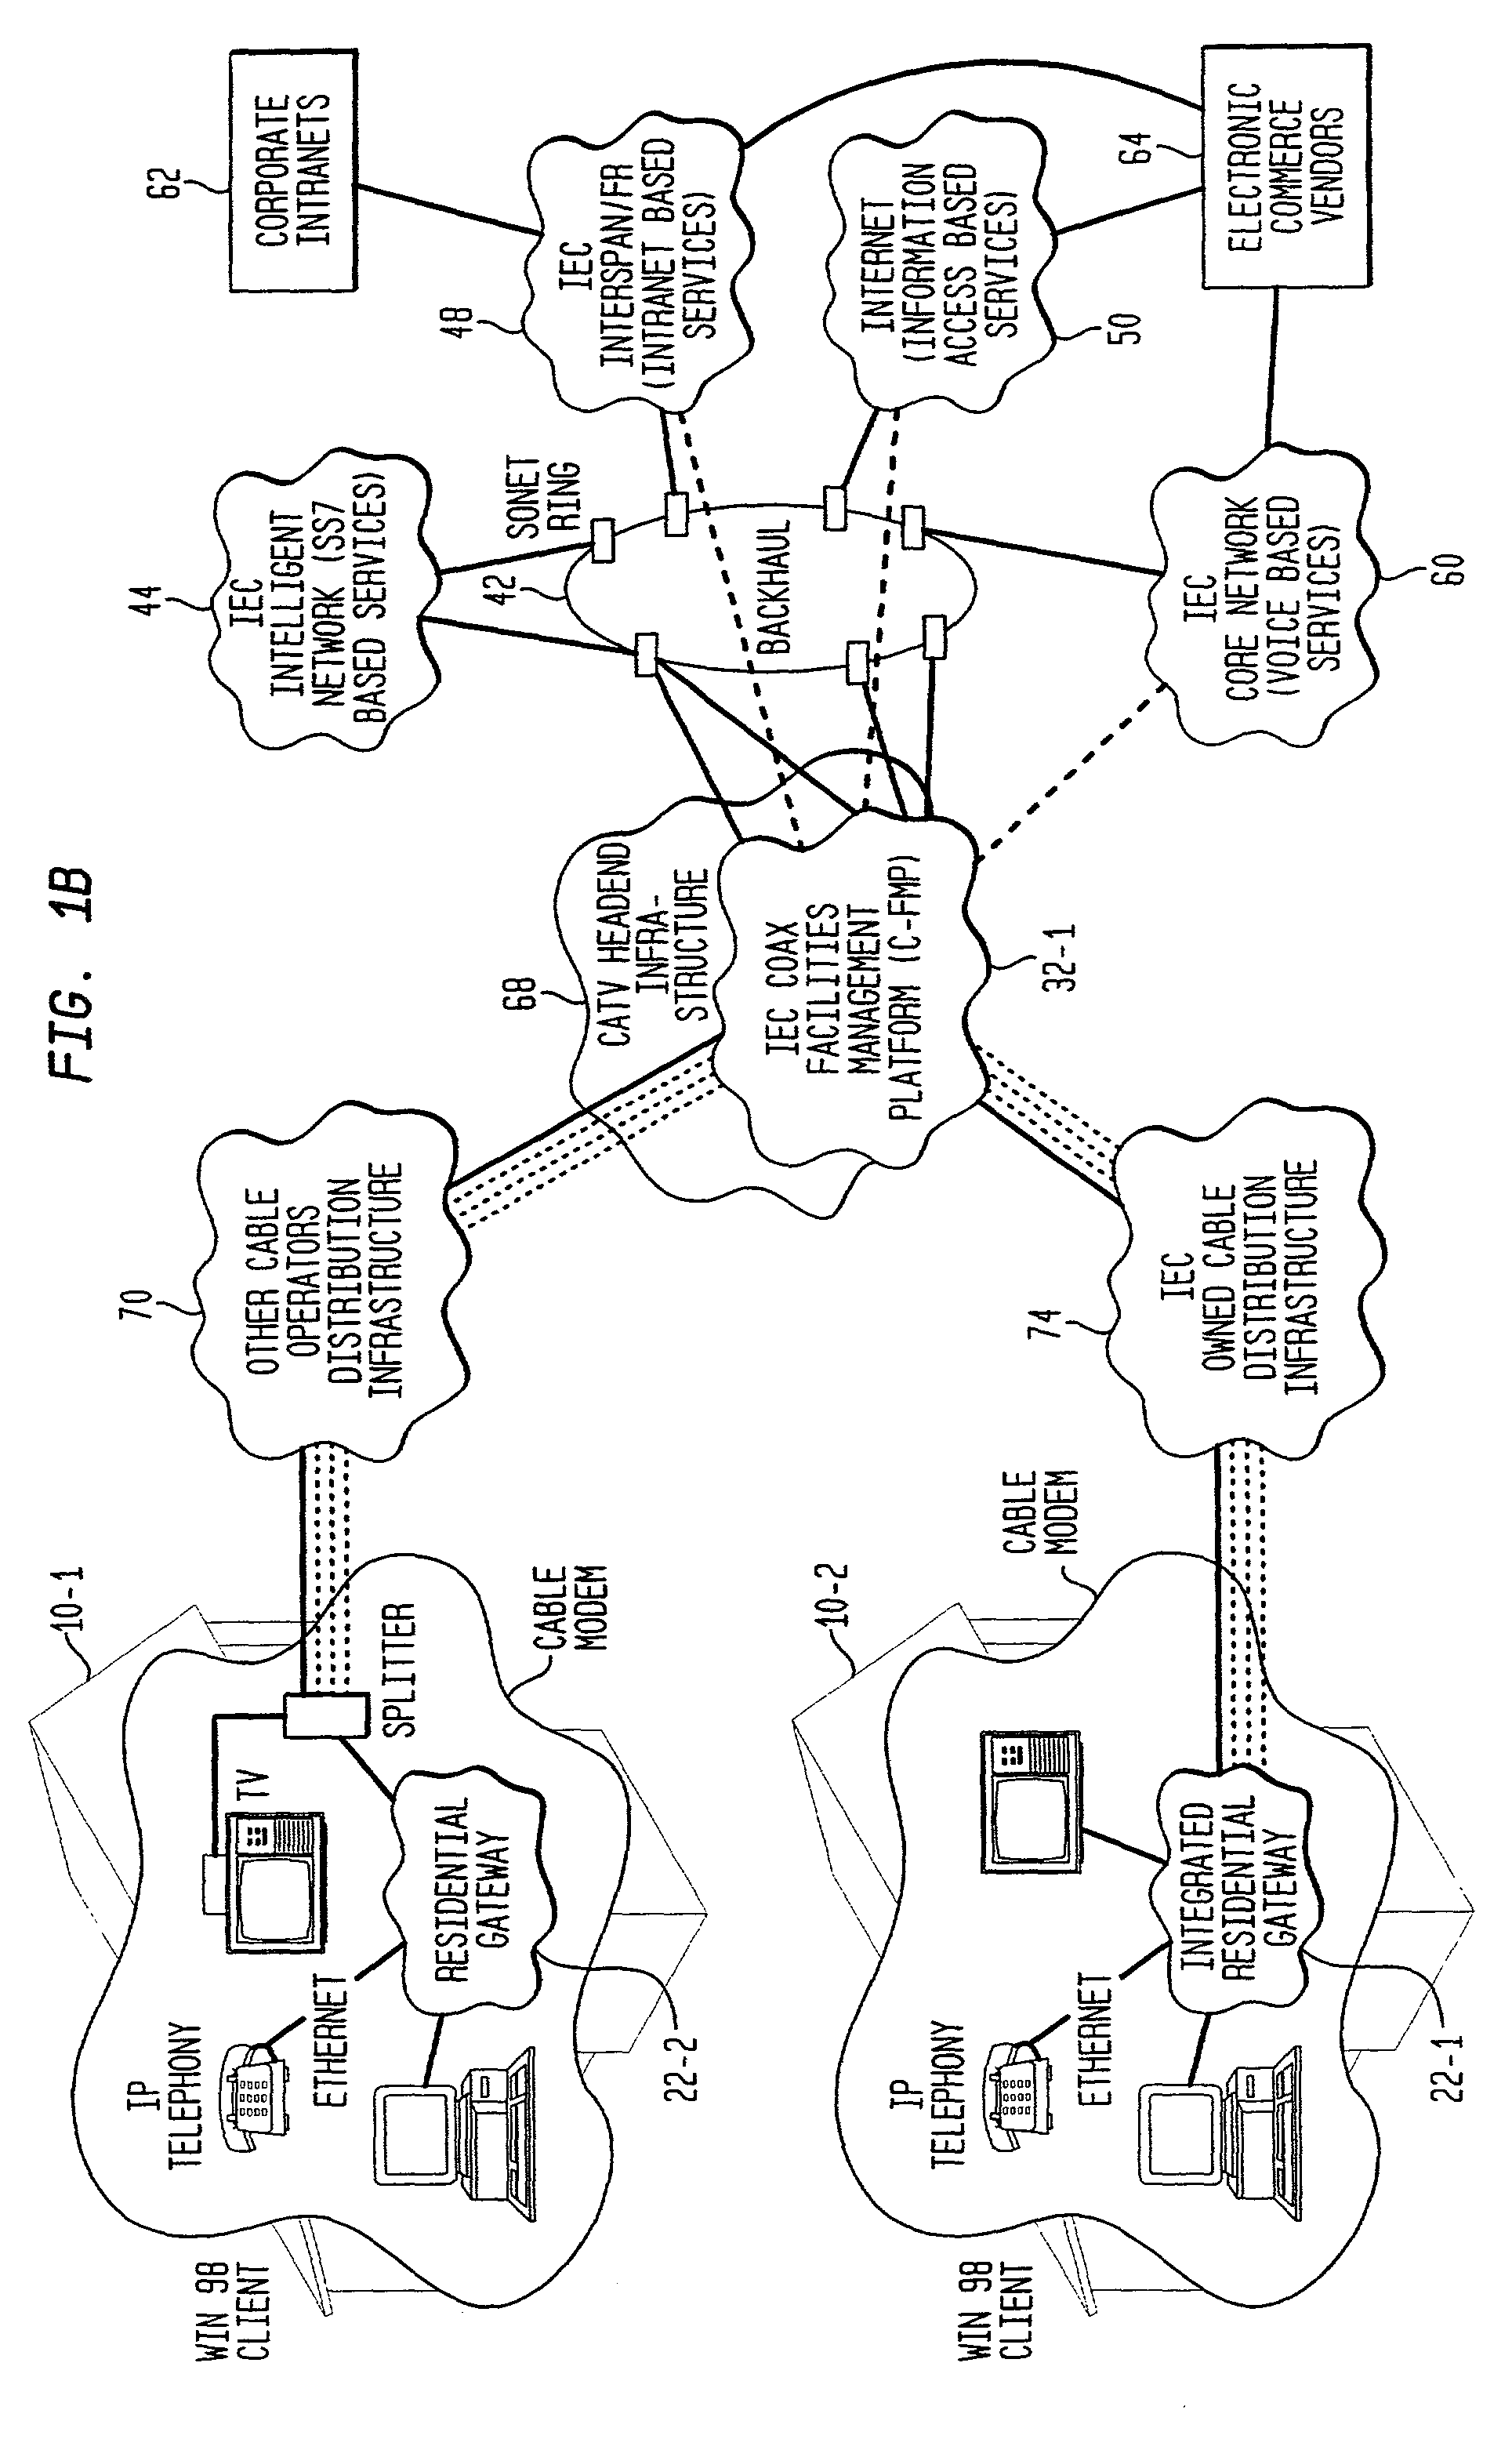 Facility management platform for a hybrid coaxial/twisted pair local loop network service architecture